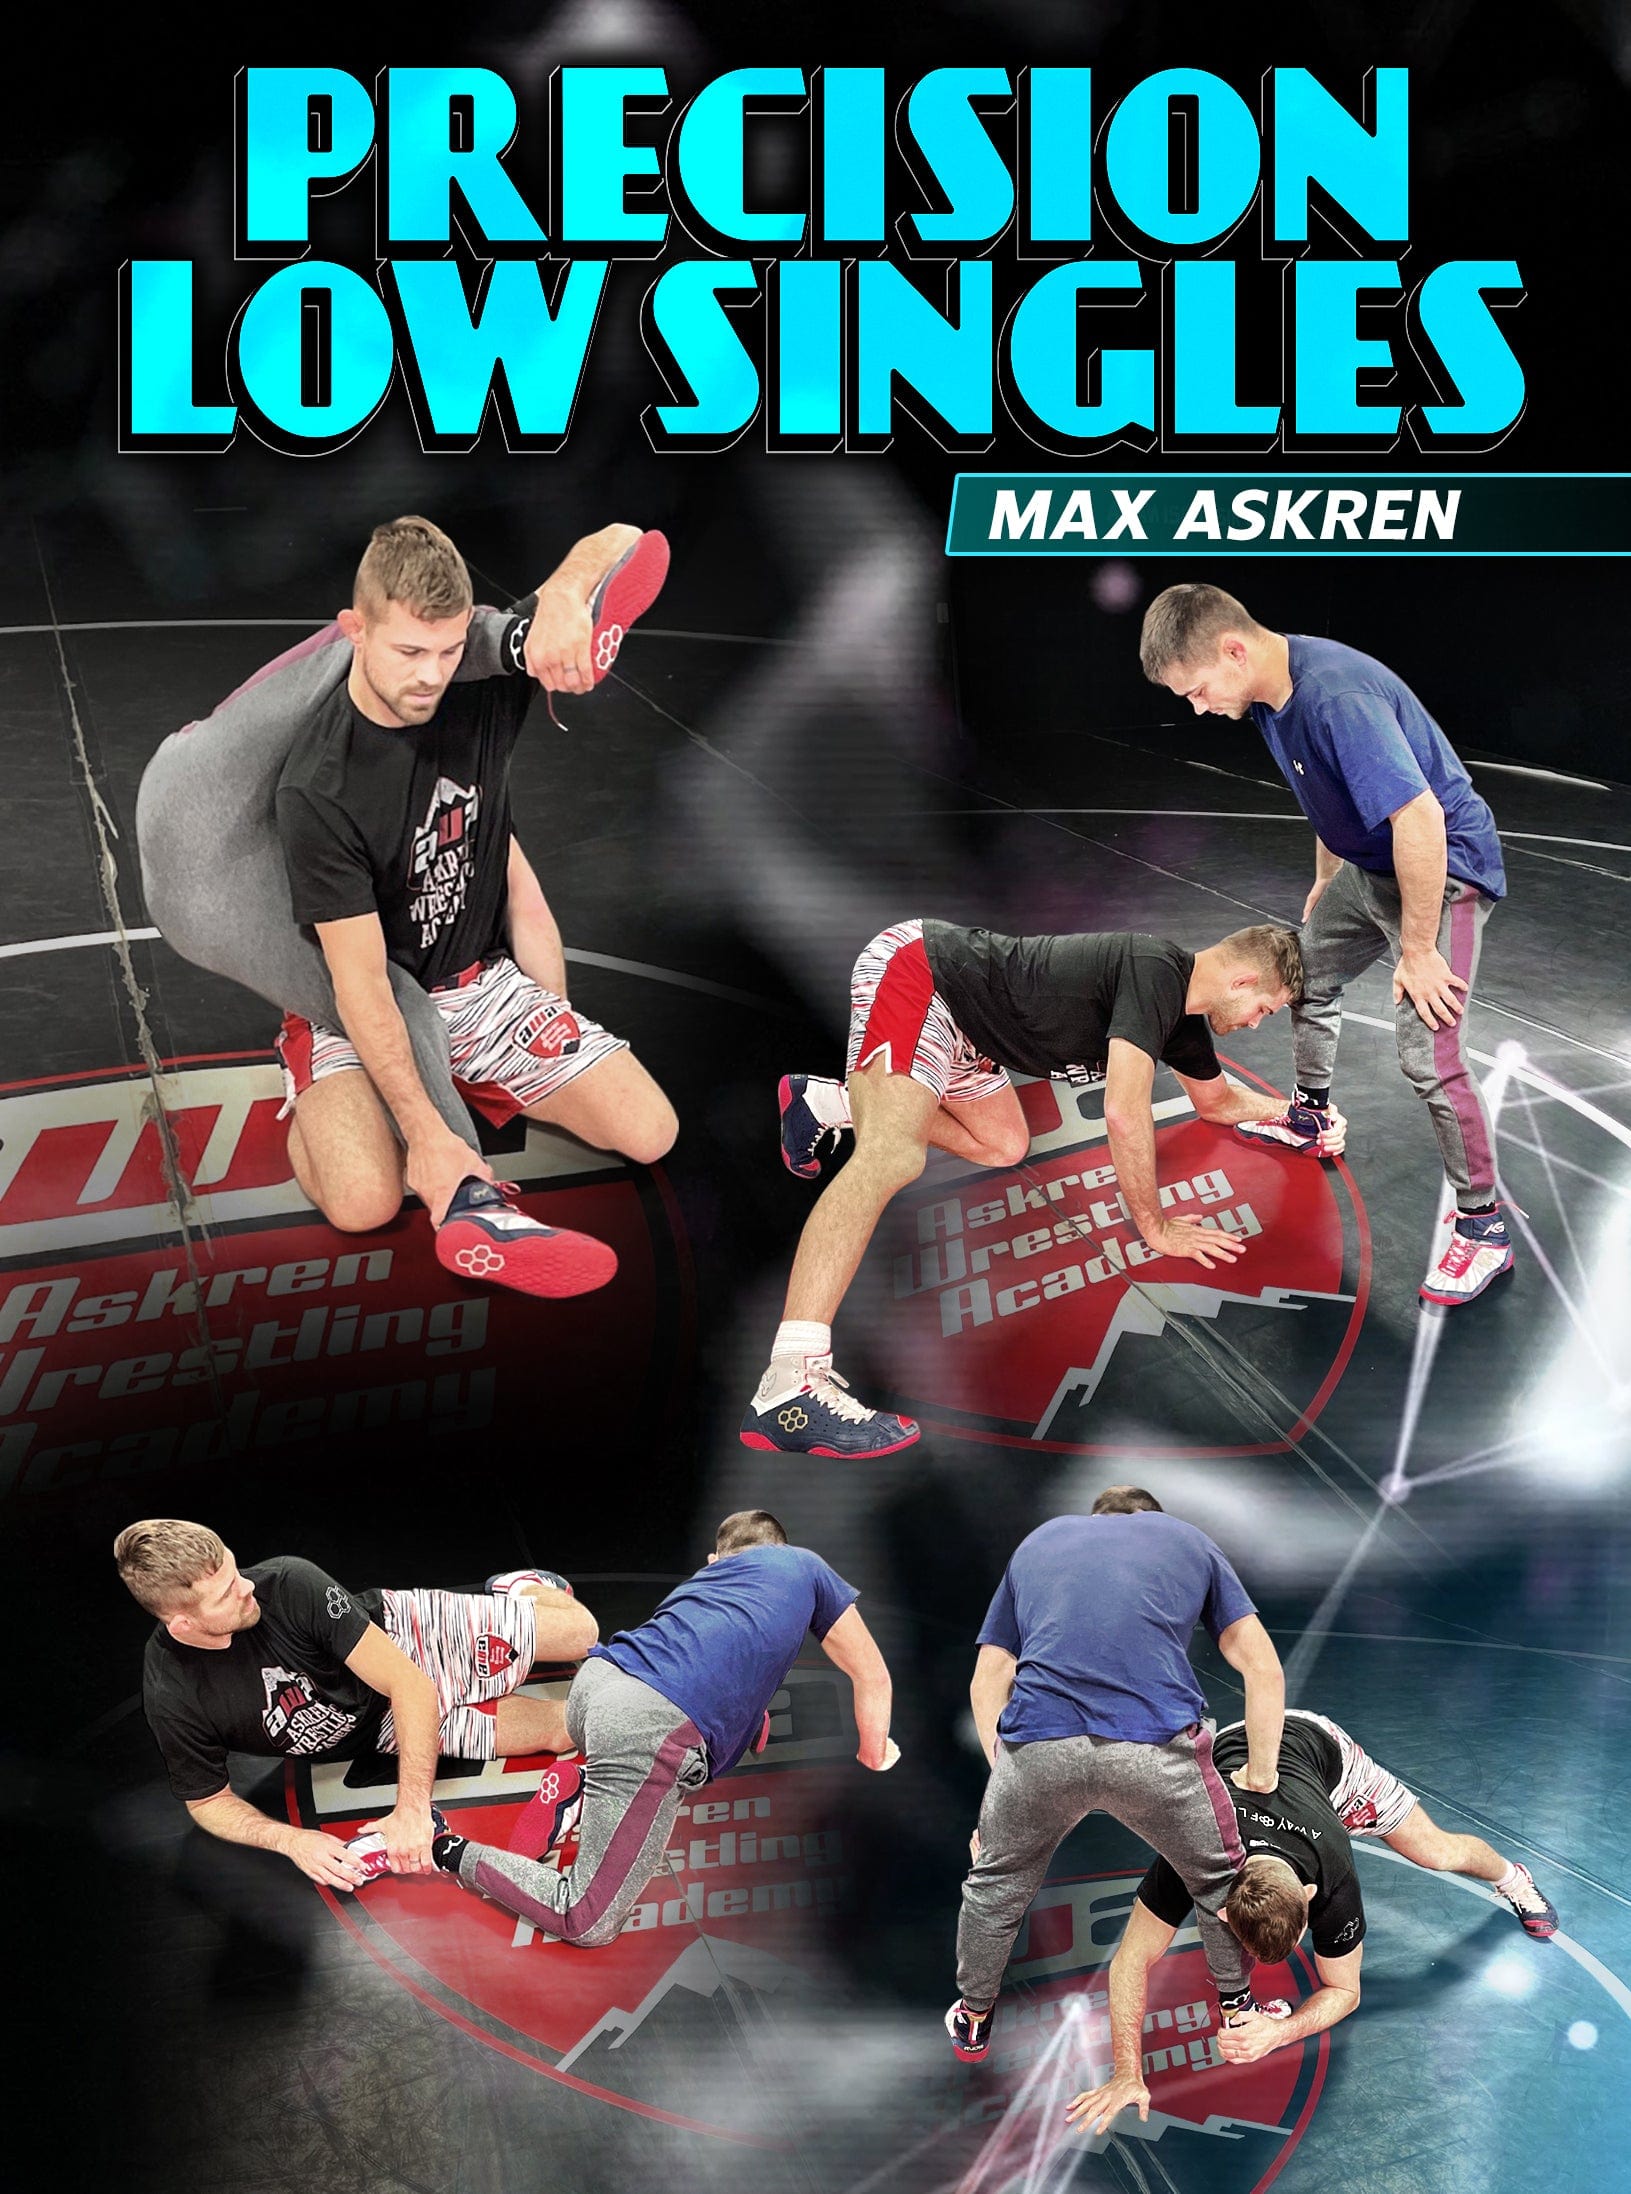 Precision Low Singles by Max Askren - Fanatic Wrestling